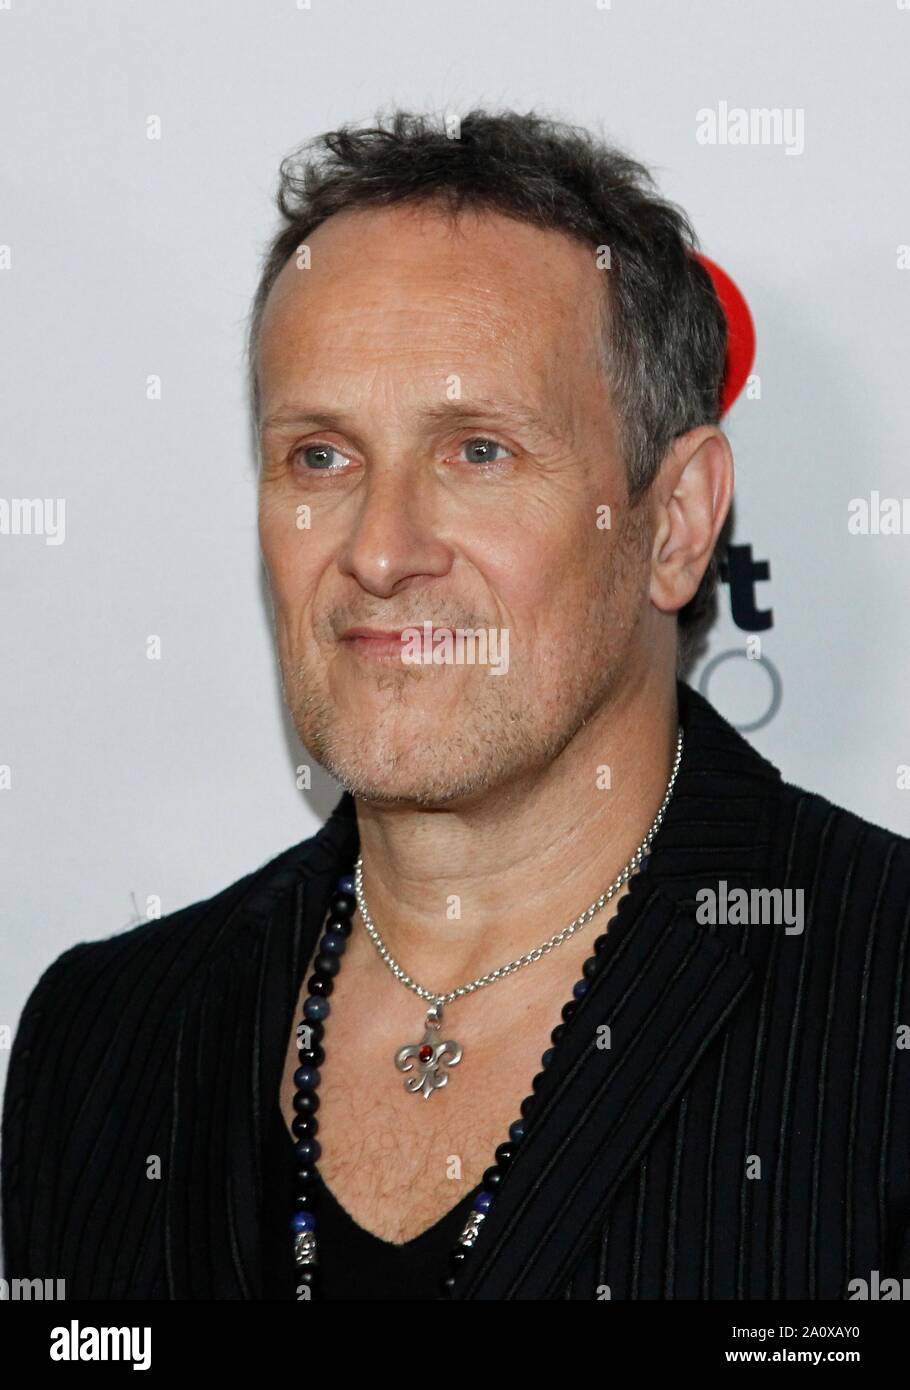 Vivian Campbell of Def Leppard at arrivals for 2019 iHeartRadio Music Festival - SAT, T-Mobile Arena, Las Vegas, NV September 21, 2019. Photo By: JA/Everett Collection Stock Photo